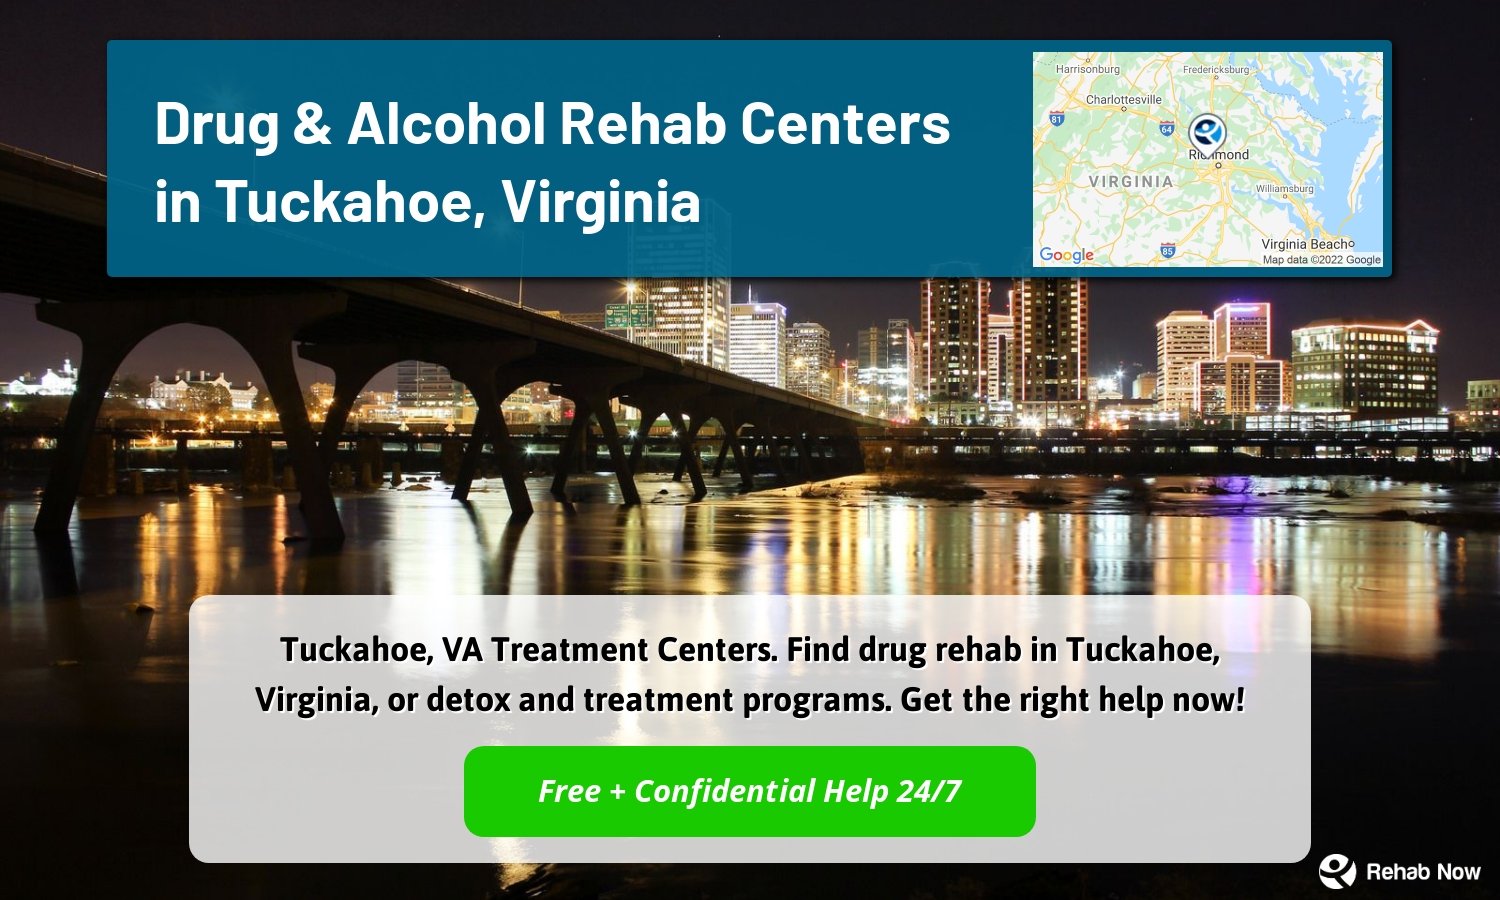 Tuckahoe, VA Treatment Centers. Find drug rehab in Tuckahoe, Virginia, or detox and treatment programs. Get the right help now!